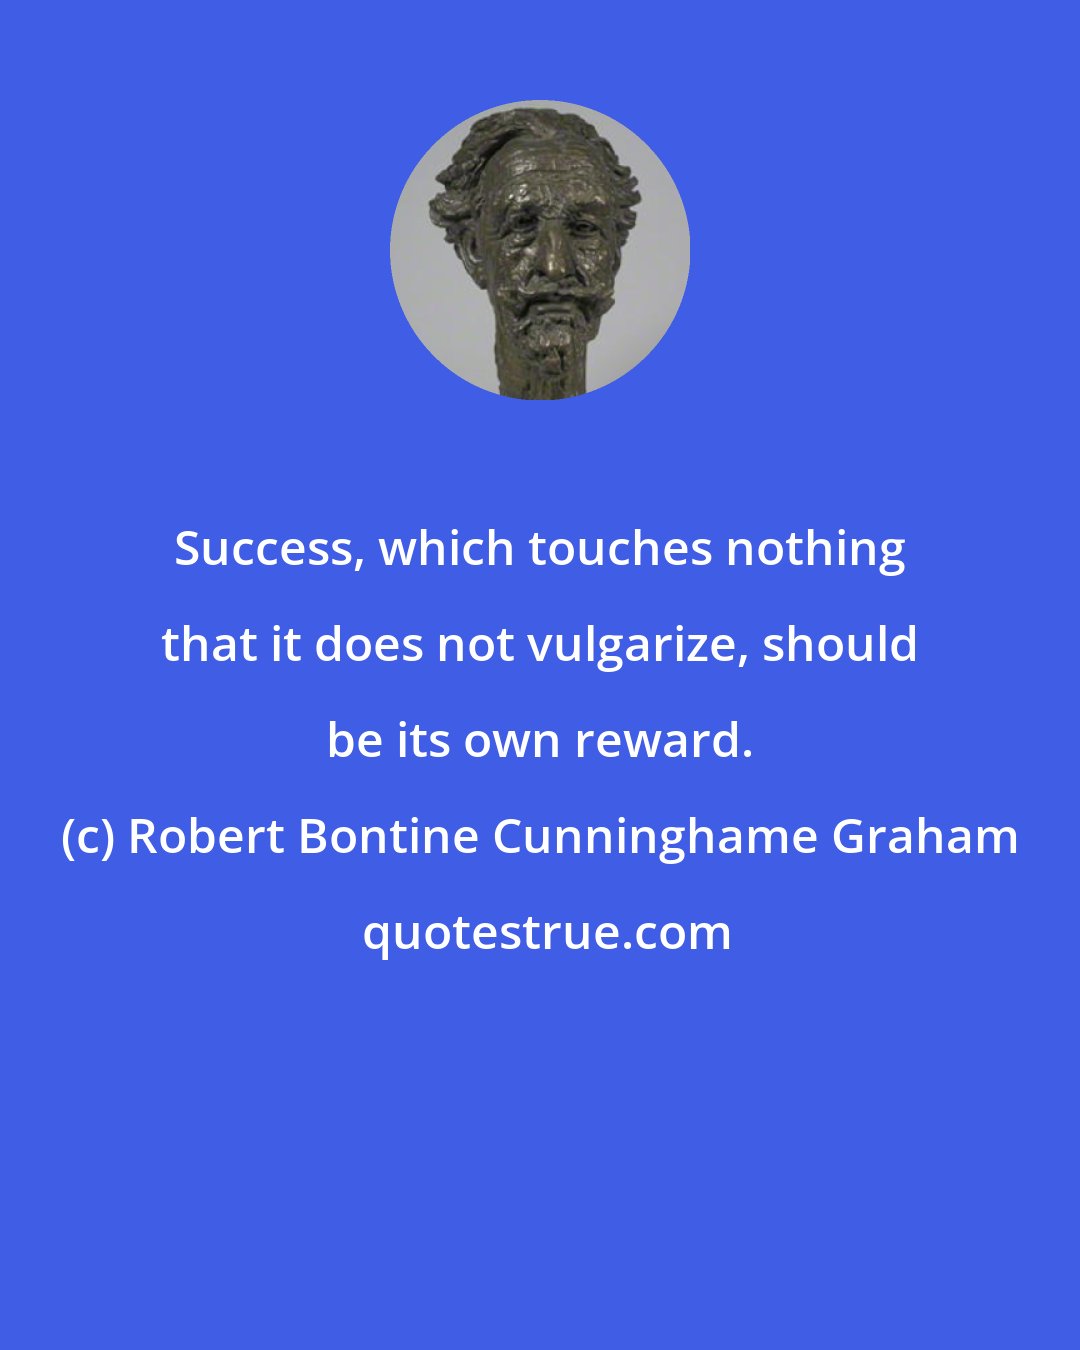 Robert Bontine Cunninghame Graham: Success, which touches nothing that it does not vulgarize, should be its own reward.